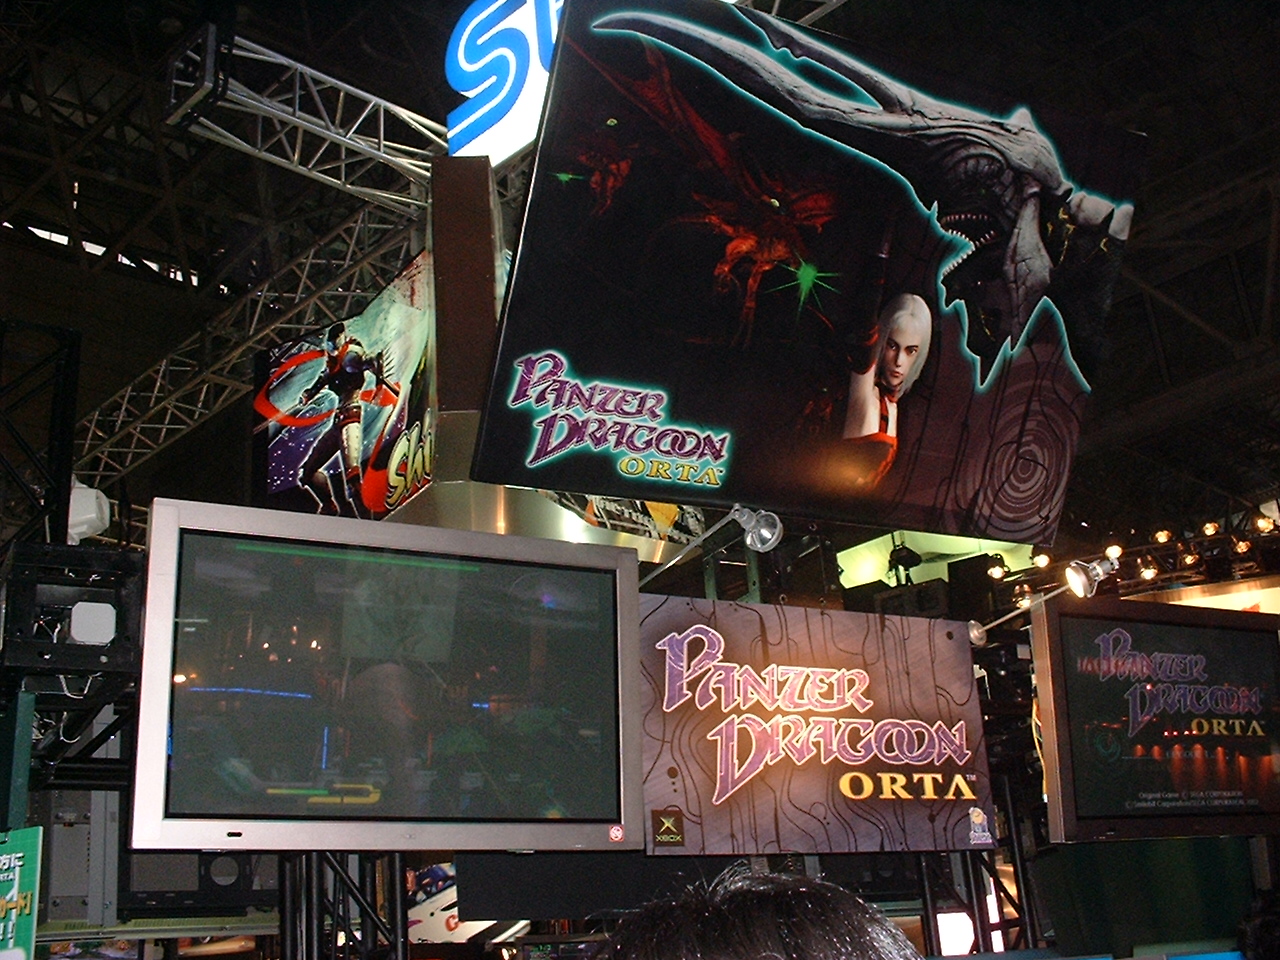 a large poster for panzer dragoon oorta with a screen